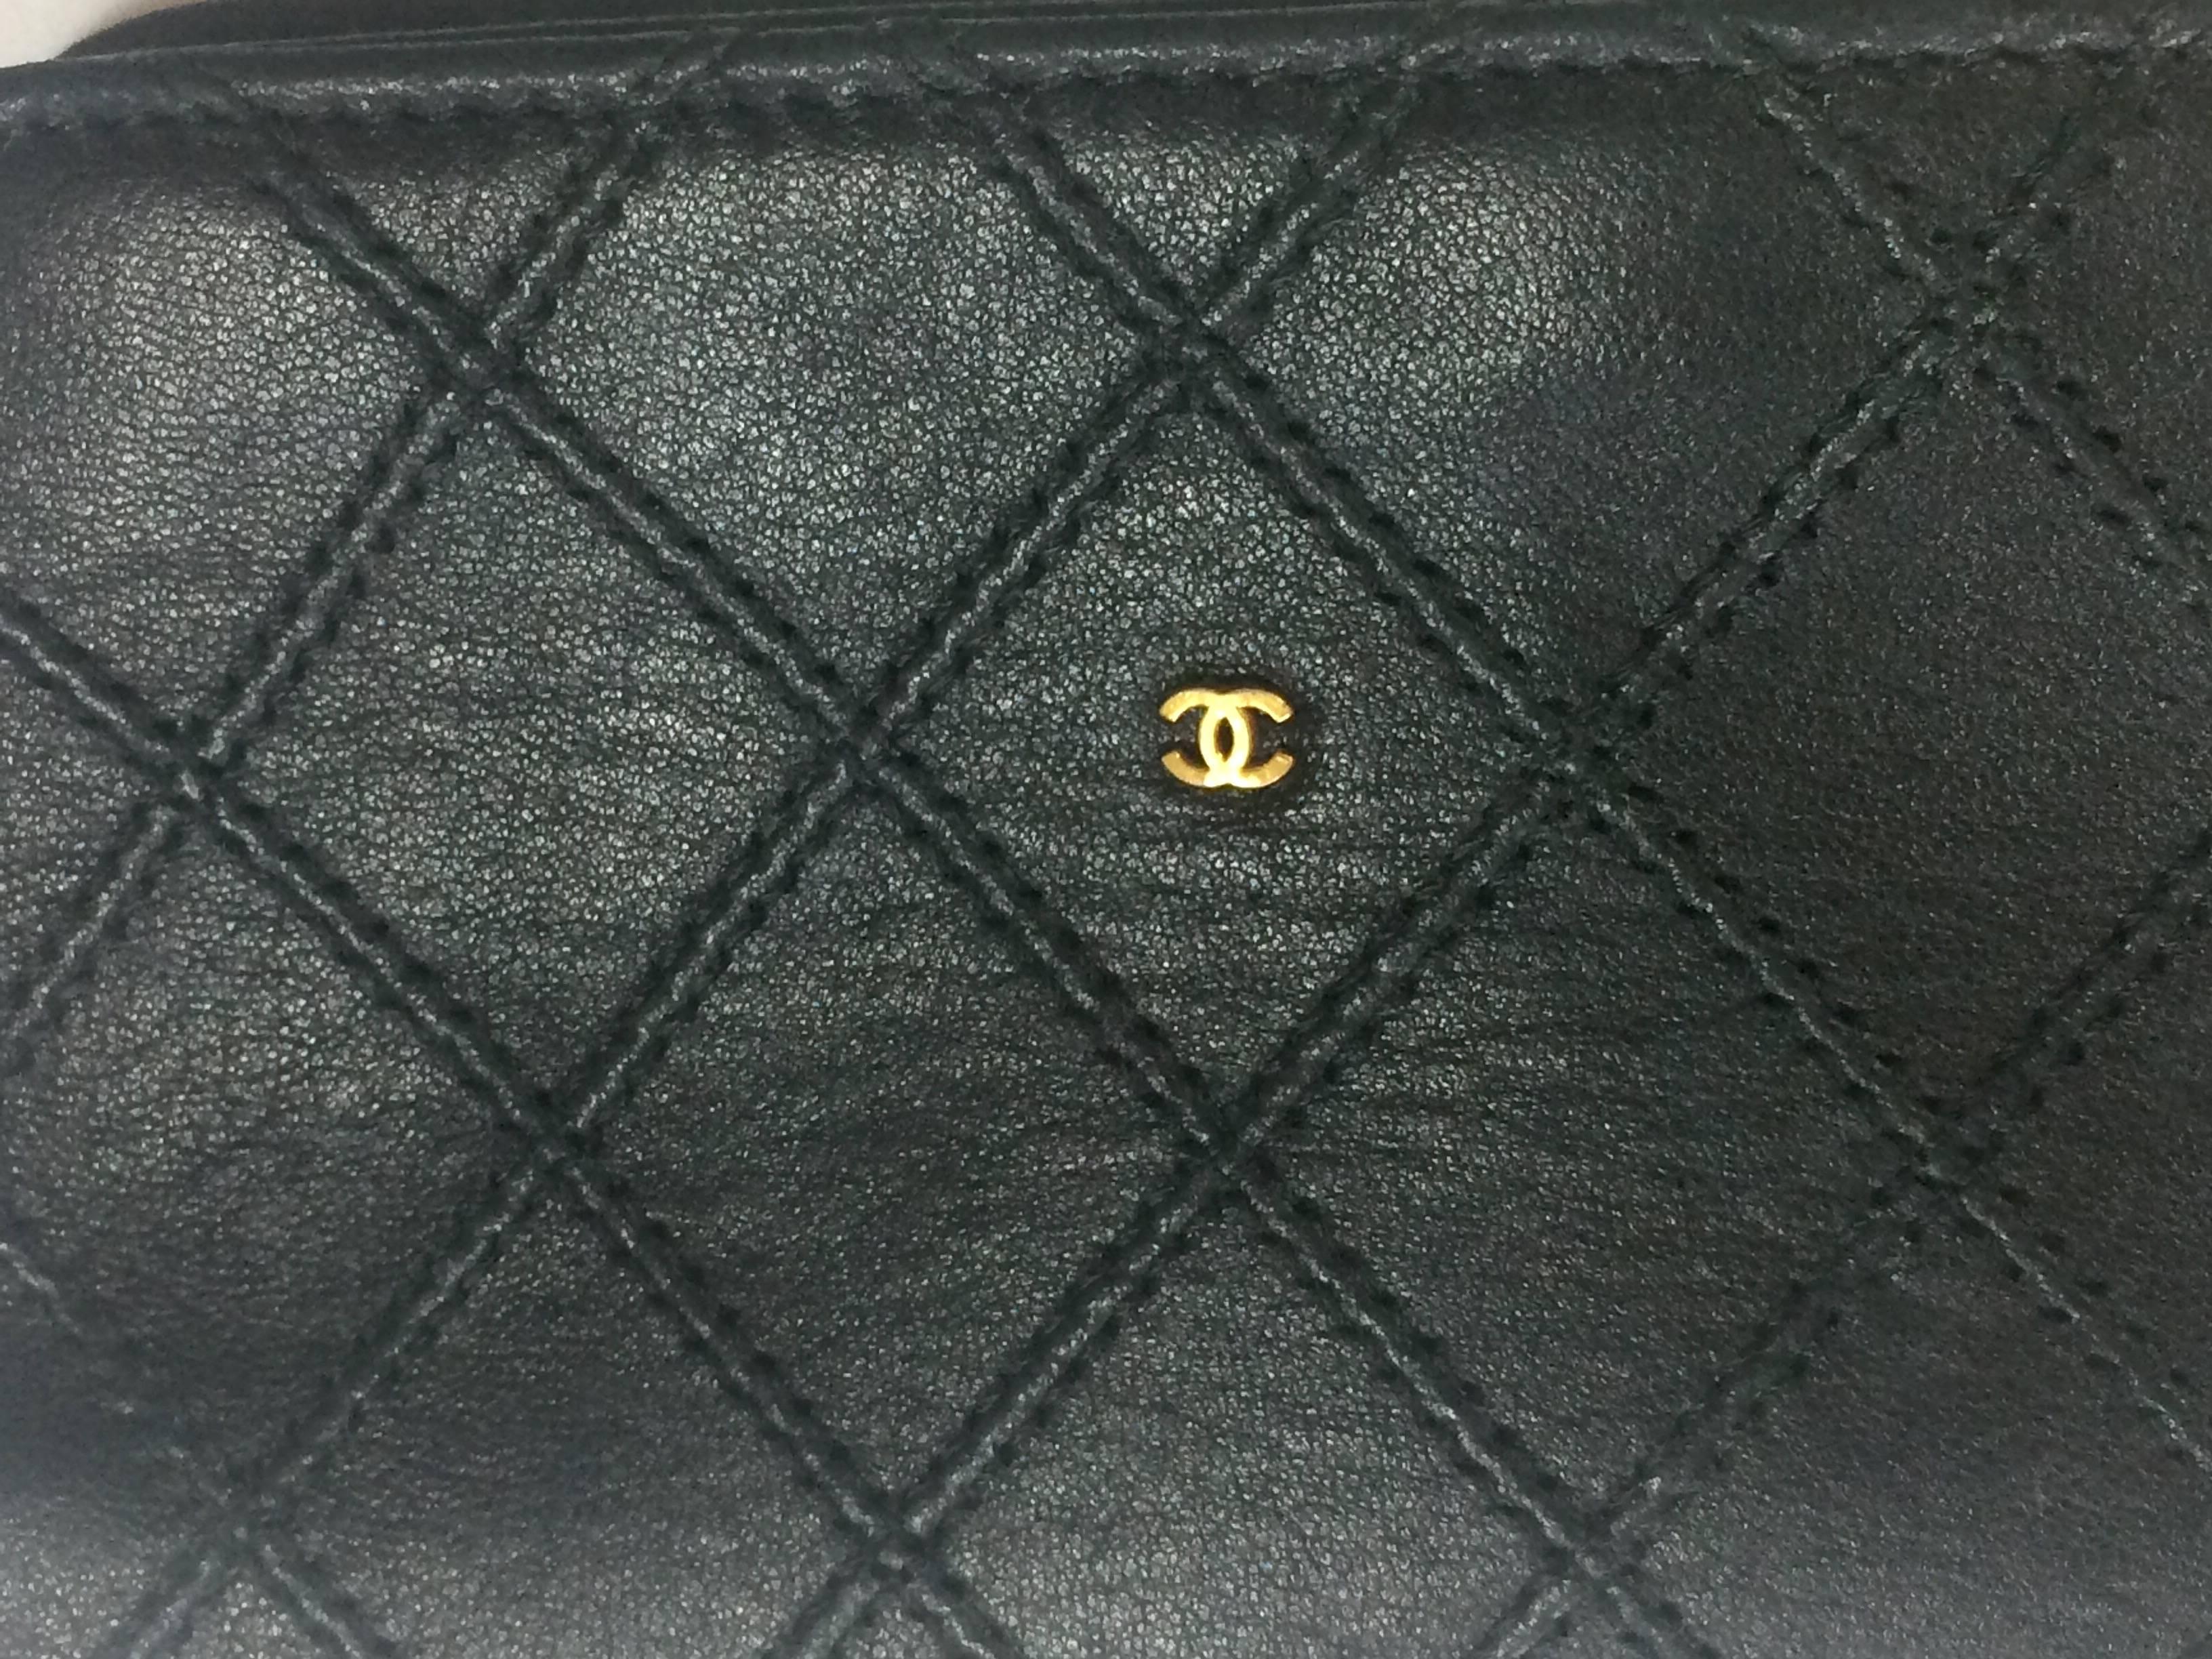 1980s. Vintage CHANEL black goat leather mini pouch, makeup pouch, coin case with golden mini CC mark.

Introducing another CHANEL vintage piece, a small black goatskin mini cosmetic/makeup pouch from 80's.
Can be used as case, coin wallet